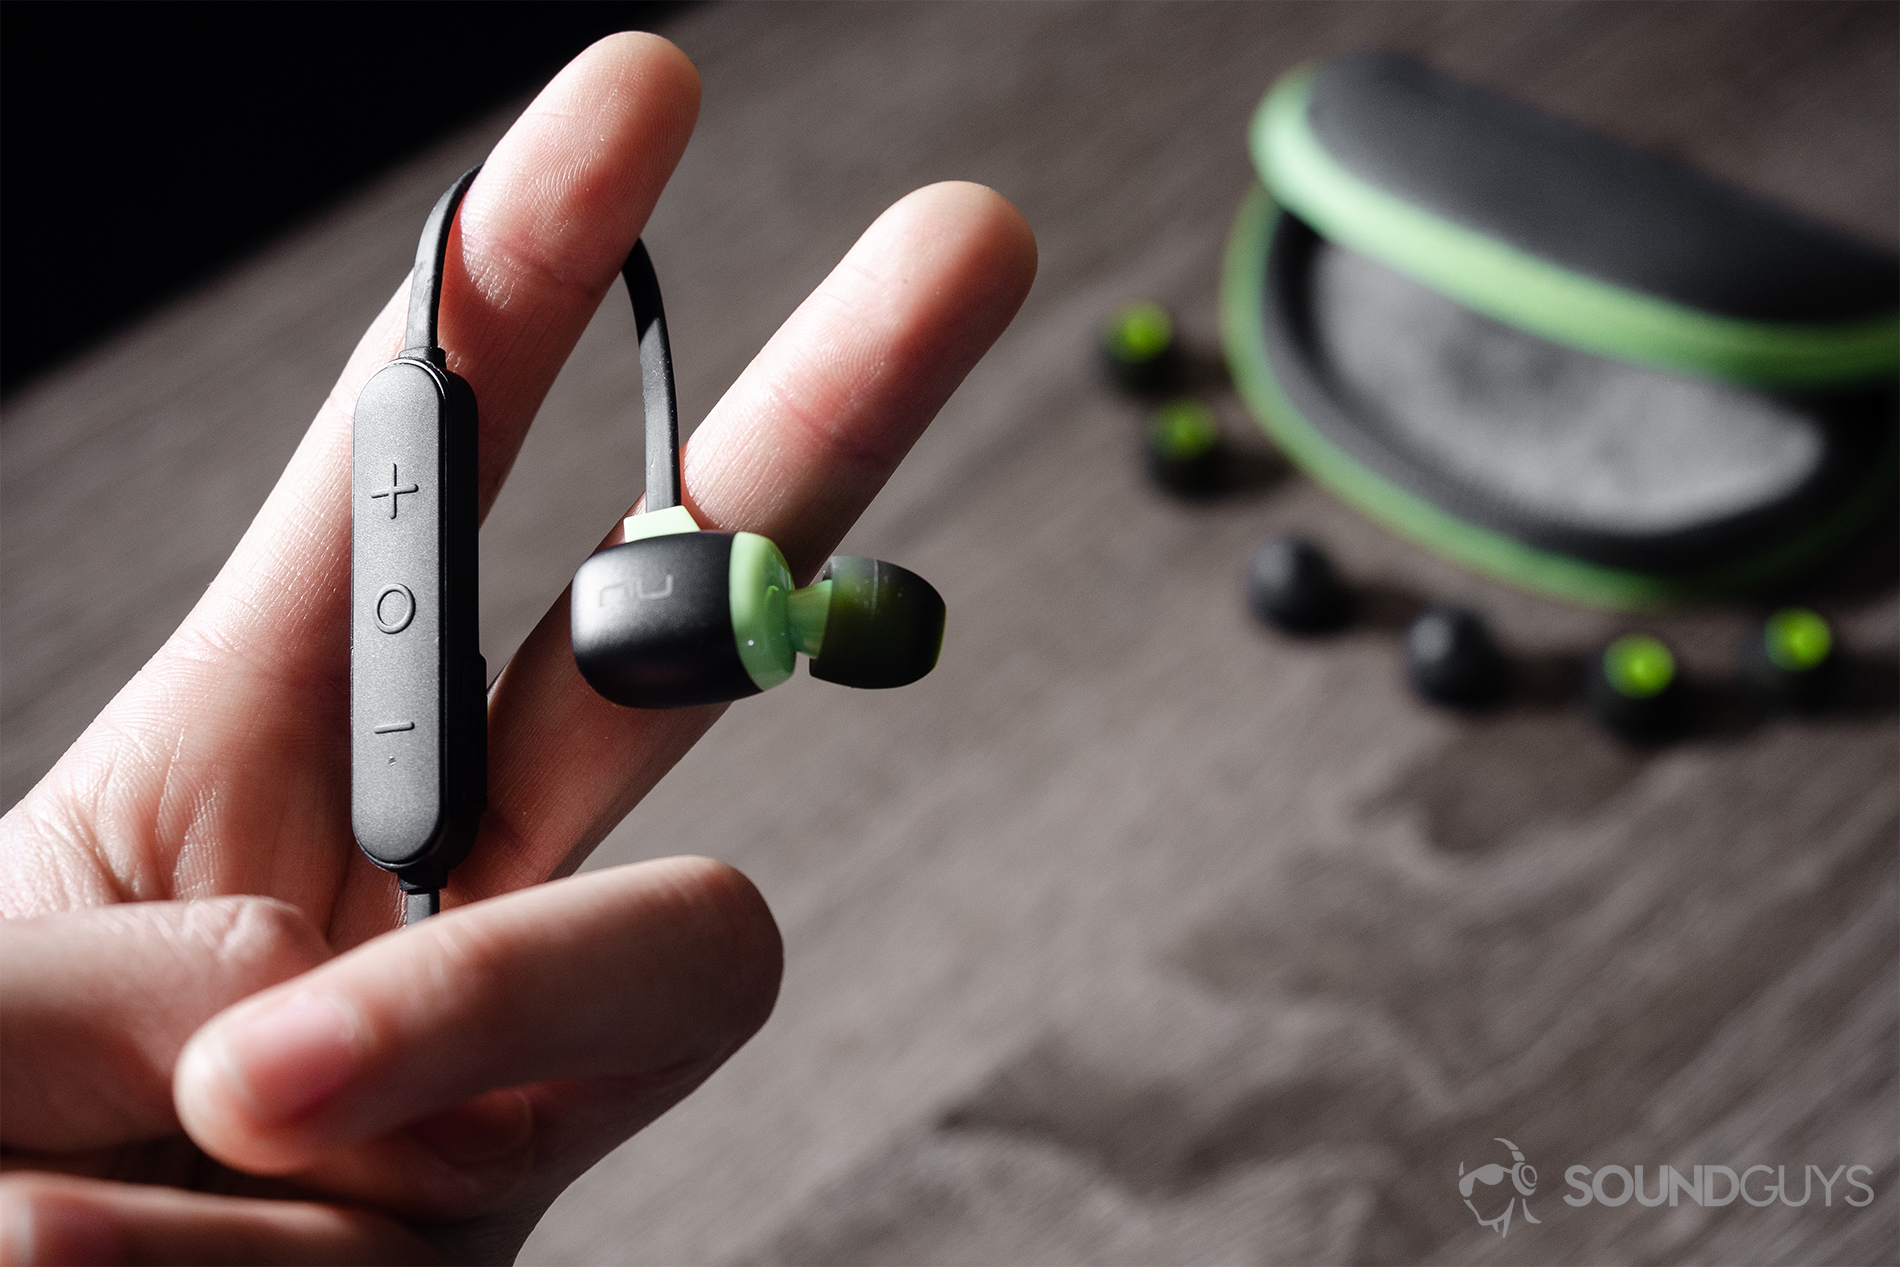 Optoma NuForce Be Sport4: The earbuds in the hand with the spare ear tips and carrying case in the background.